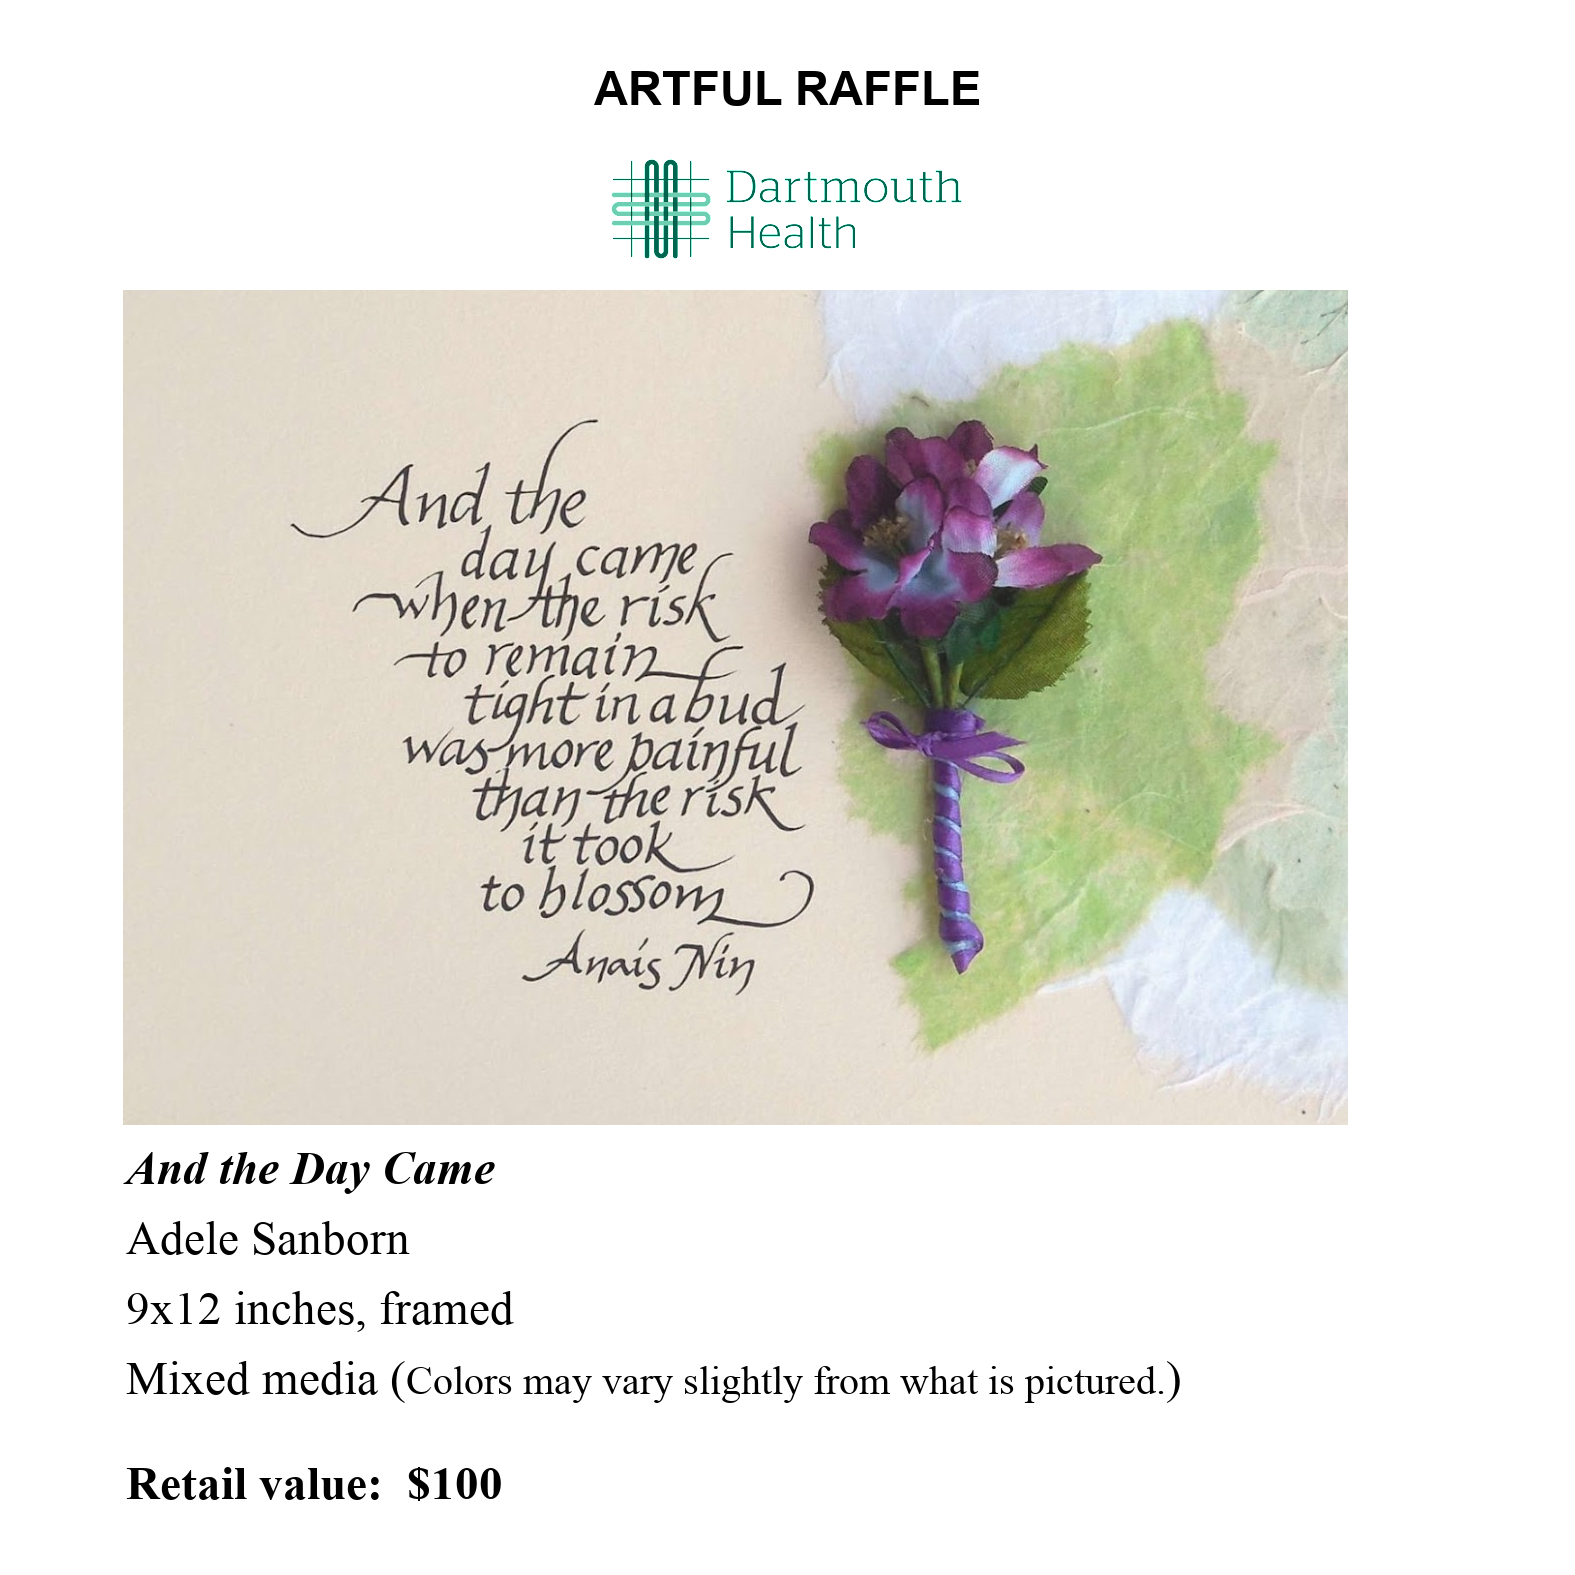 RAFFLE_DayCame_A.Sanborn.png